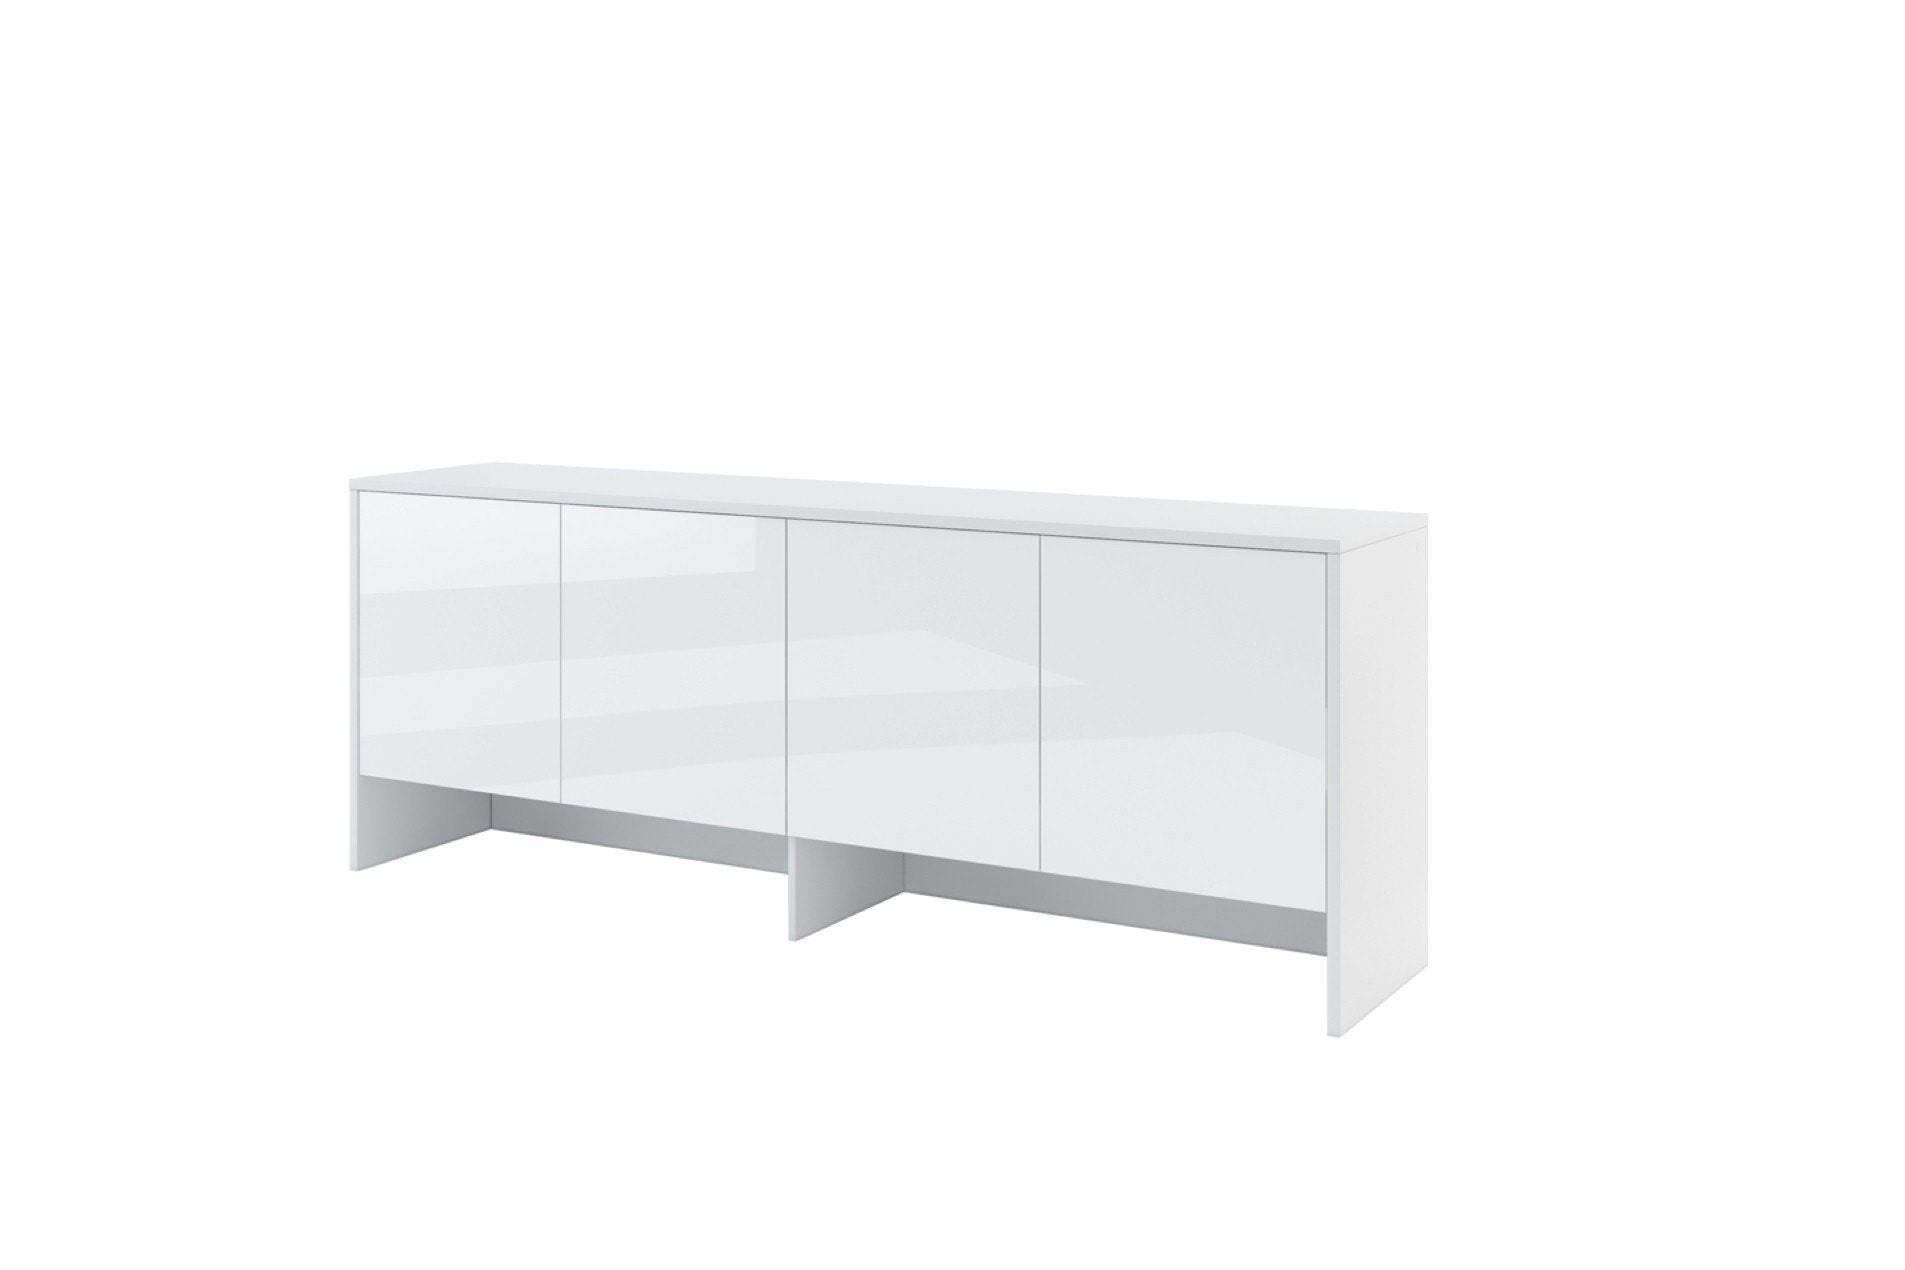 View BC10 Over Bed Unit for Horizontal Wall Bed Concept 120cm White Gloss 211cm information